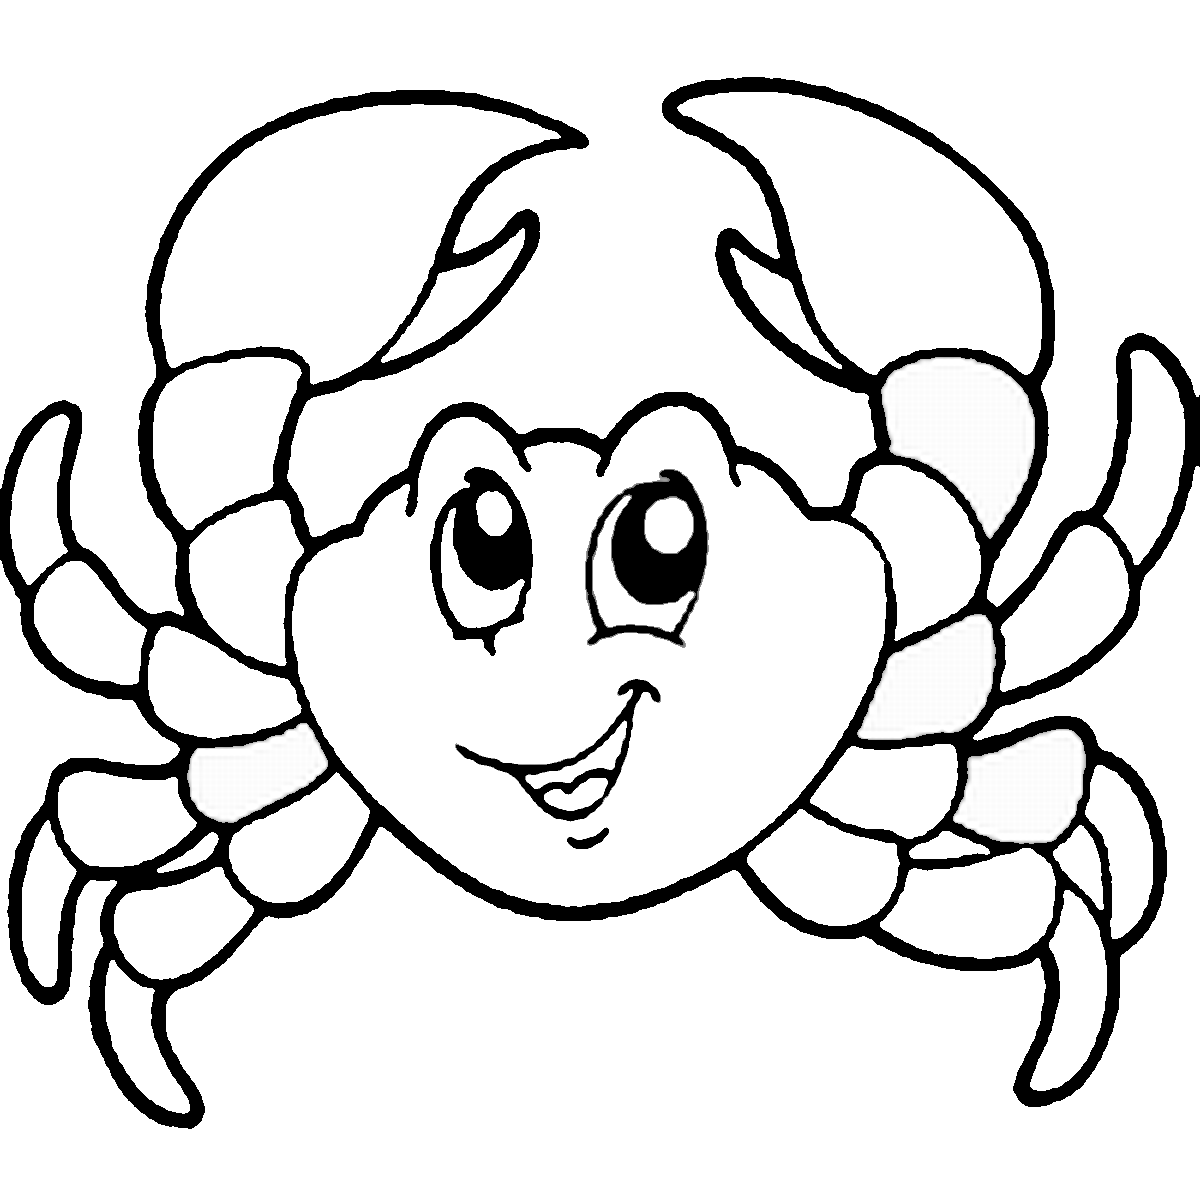 crab-coloring-pages